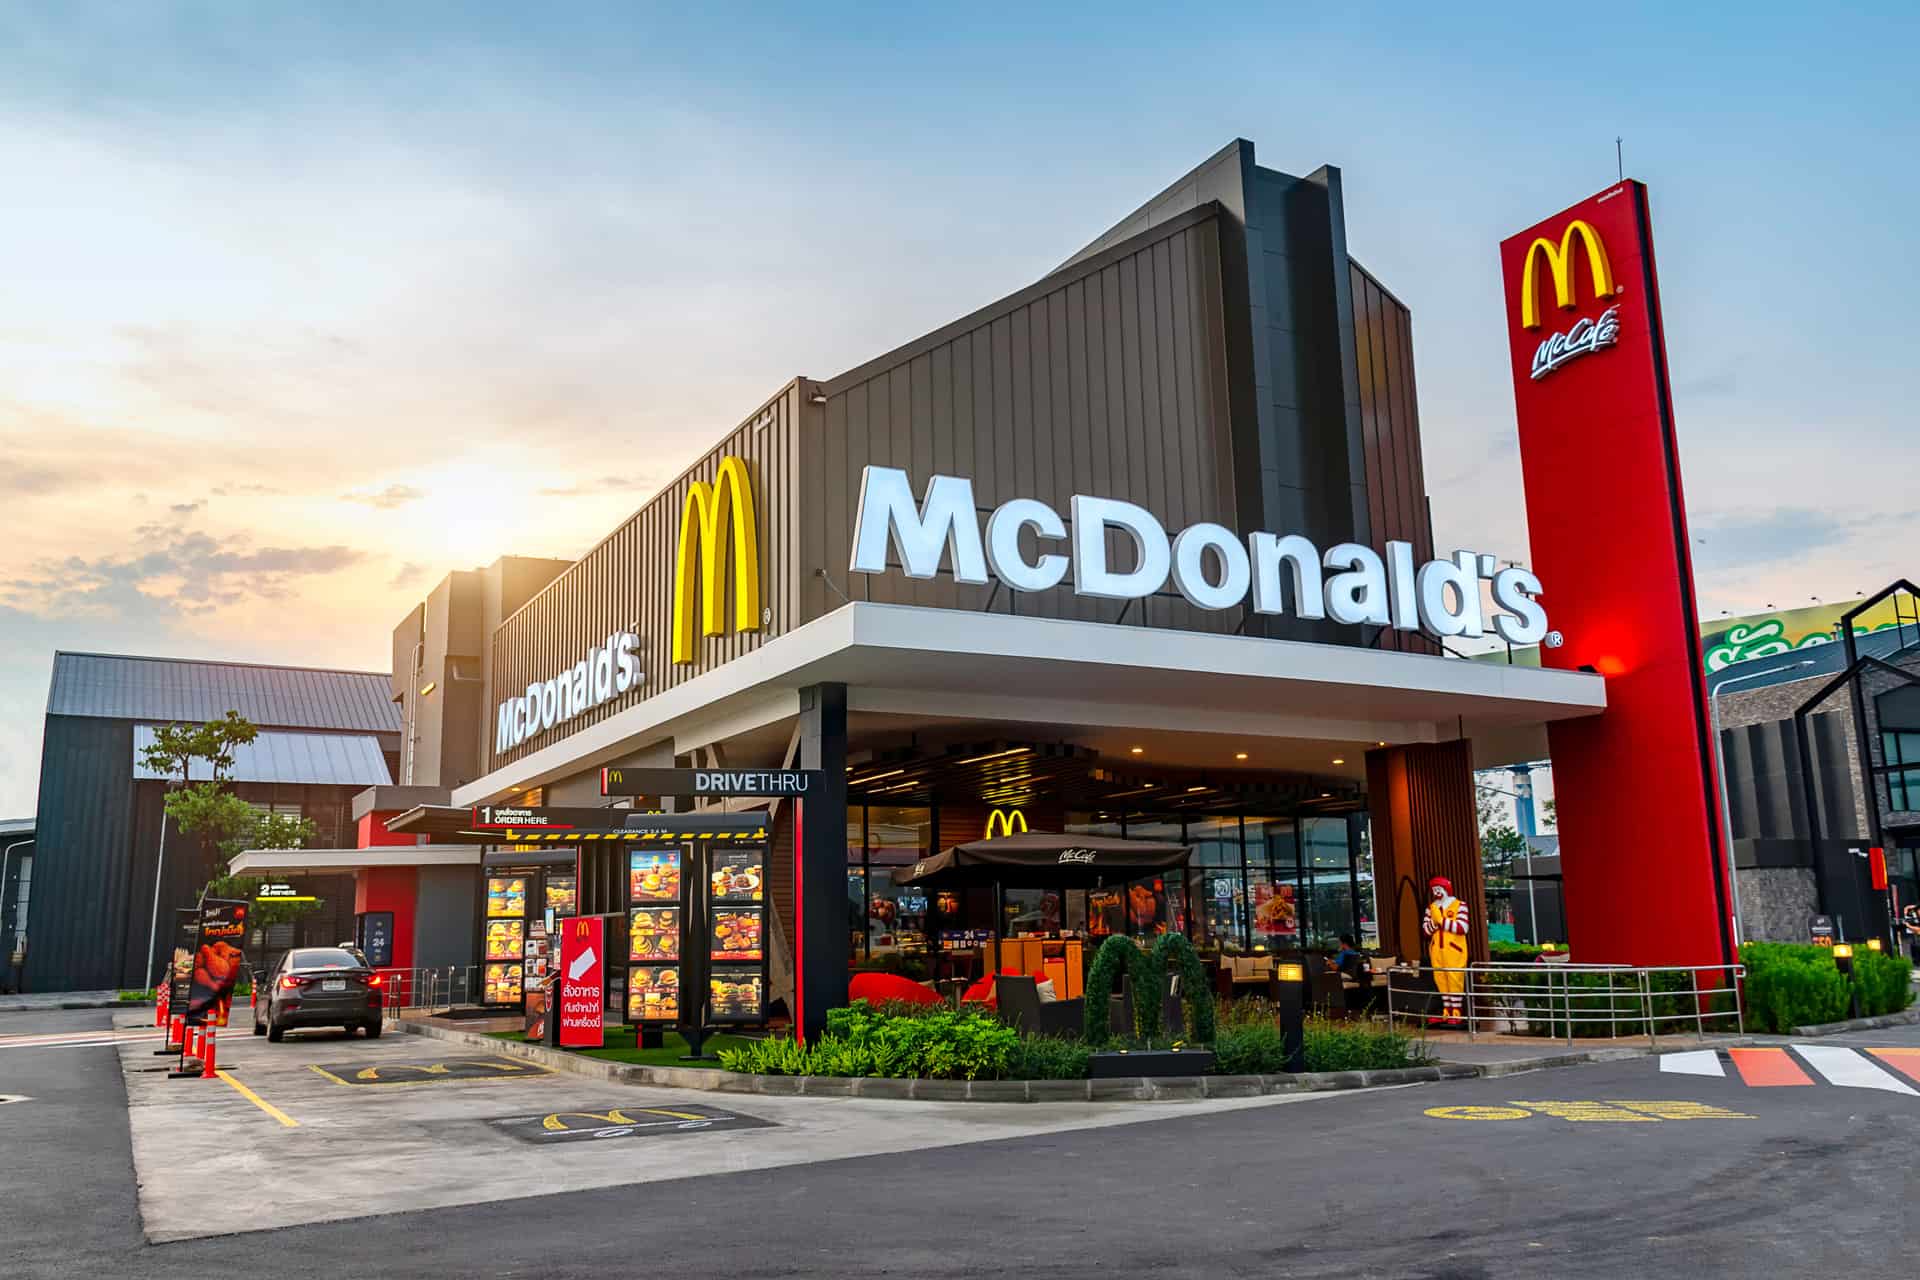 <p>There is a lot more to the fast food giant than you may know. McDonald's is a huge company and much more complex than simple nuggets and fries. Take a look at these 17 little-known facts about McDonald's and you may start to appreciate your fast food a little bit more. </p> <p><em>Note: The contents of this article does not reflect the Writer's personal beliefs.</em></p>